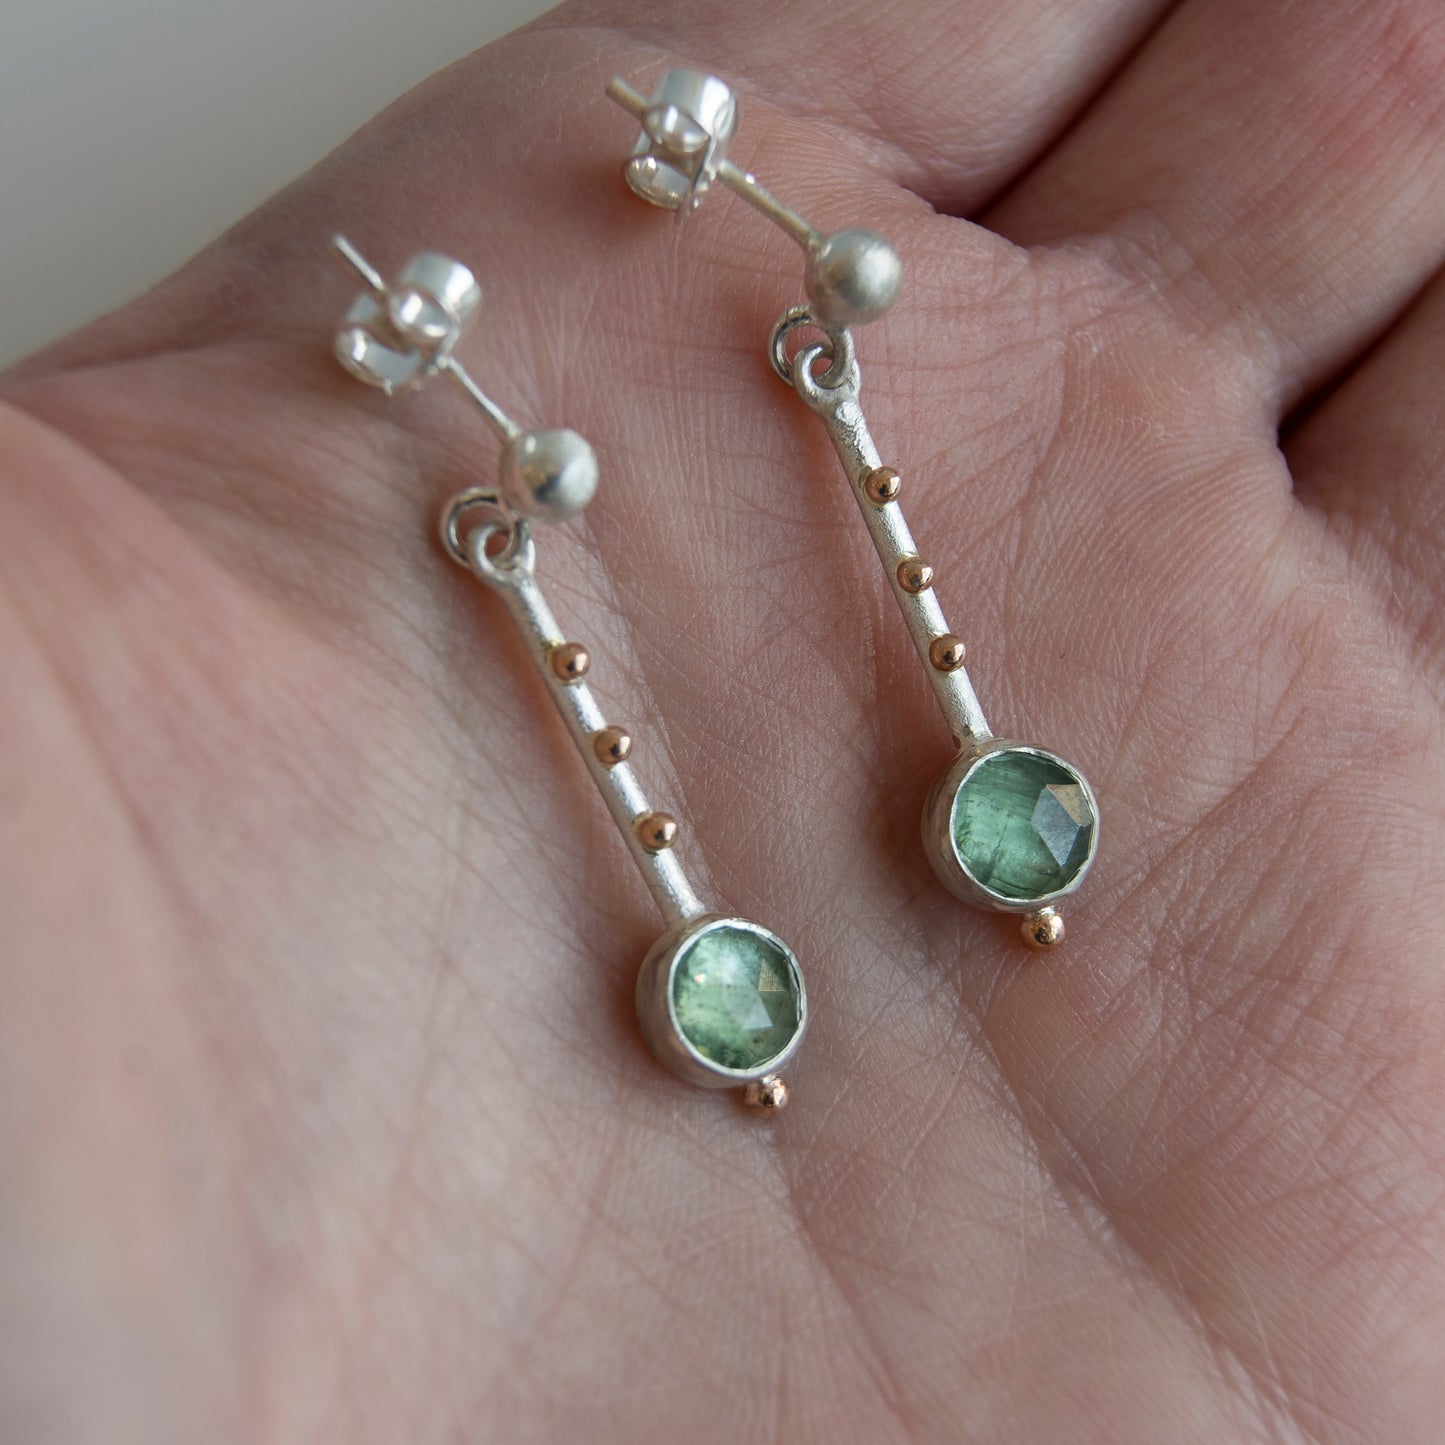 Silver Earrings Sticks With Green Kyanite And 14K Gold Beads